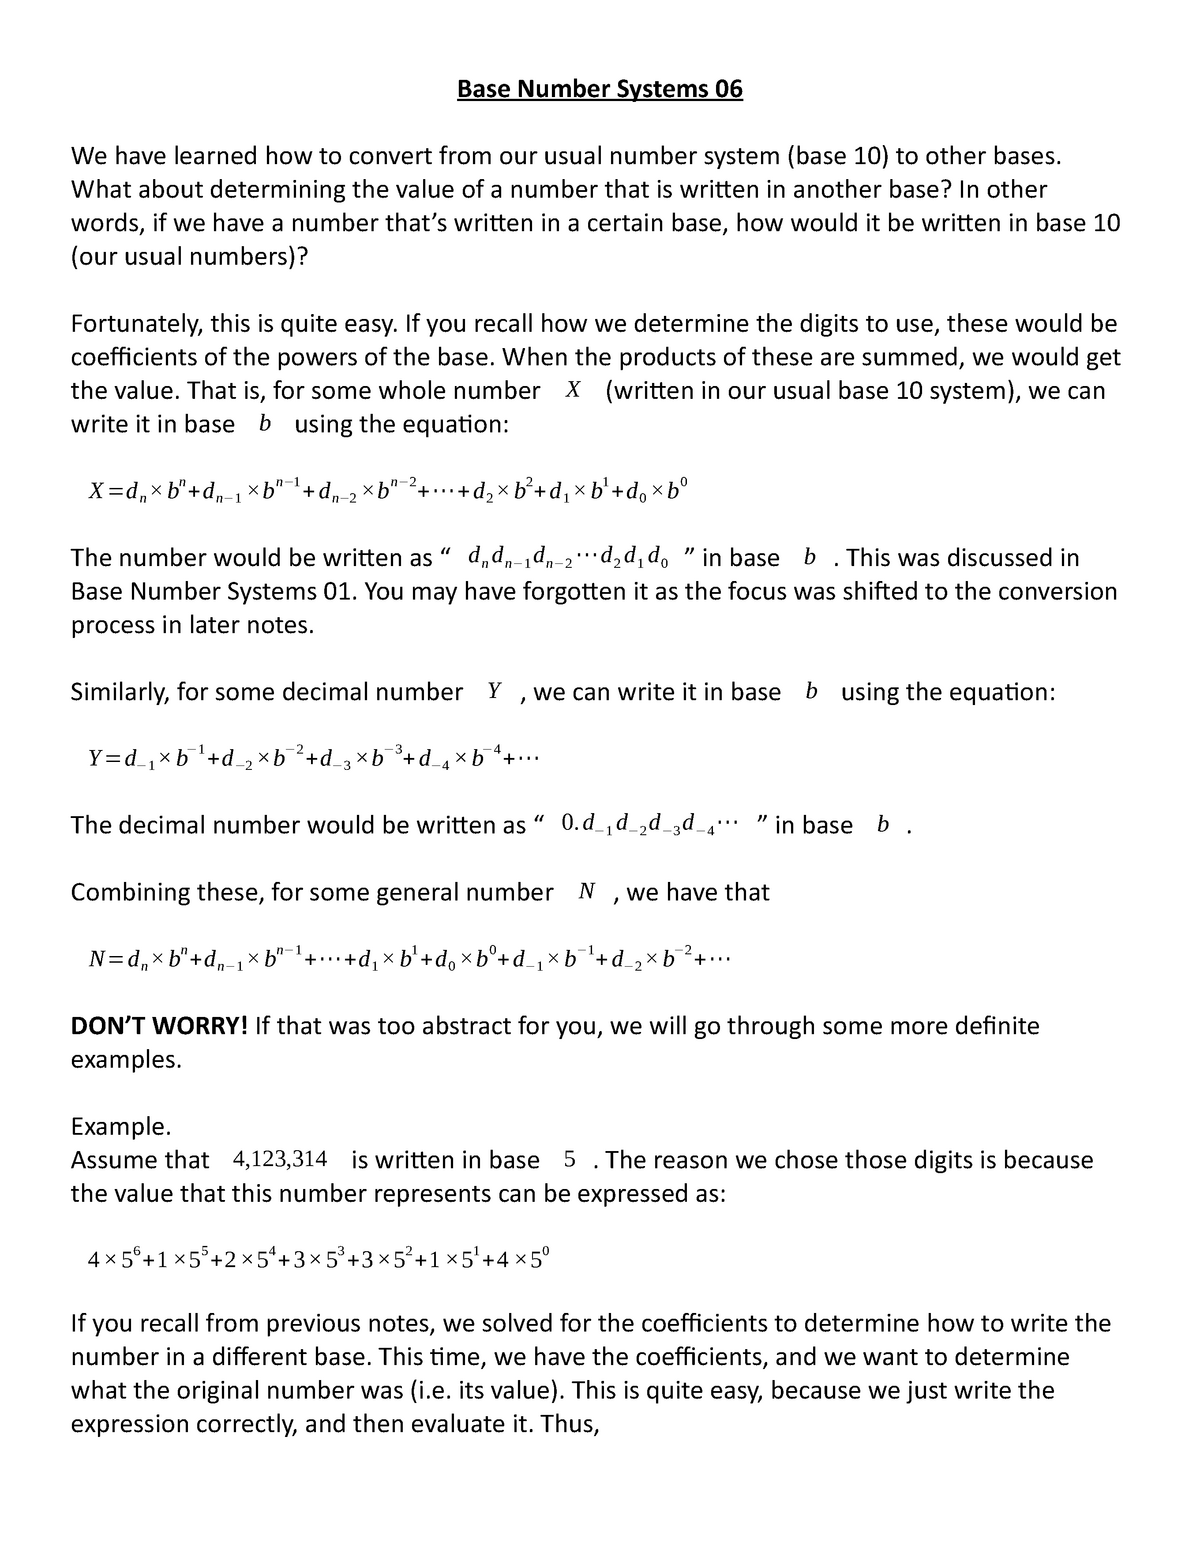 base-number-systems-06-what-about-determining-the-value-of-a-number